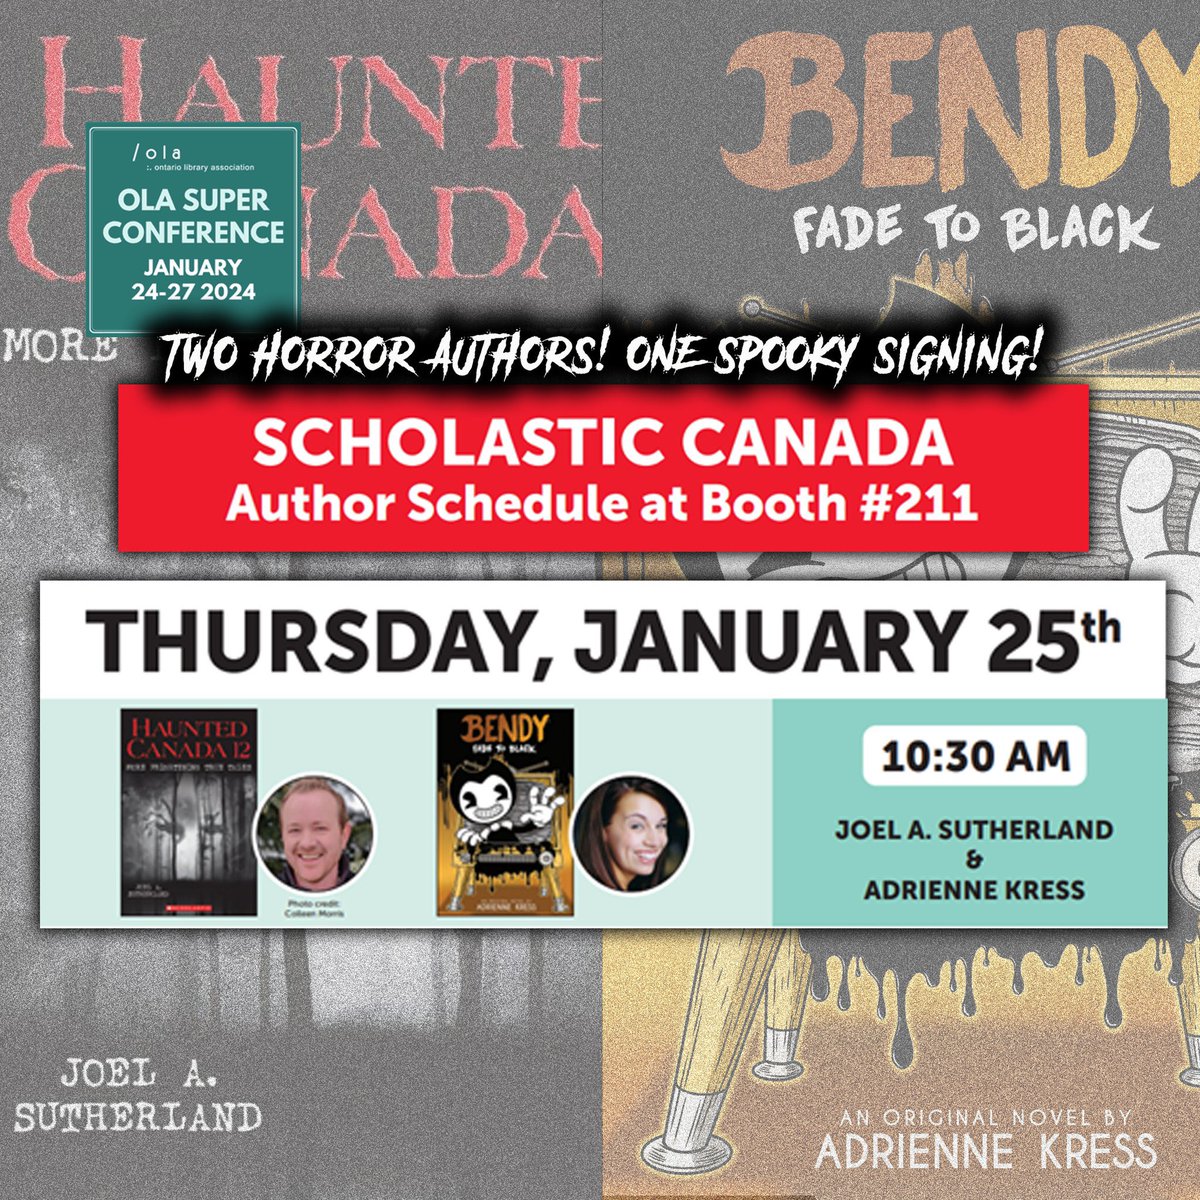 TODAY is the day! 10:30am at the OLA Superconference! Find me and the incredible @joelasutherland signing our books (BENDY: FADE TO BLACK & HAUNTED CANADA) at the Scholastic booth #211! Can't wait!! 

#OLA #OLA2024 #ONschoolLibraries #Bendy #BATIM #BATDR #BendyFTB #OLASC #OLASC24